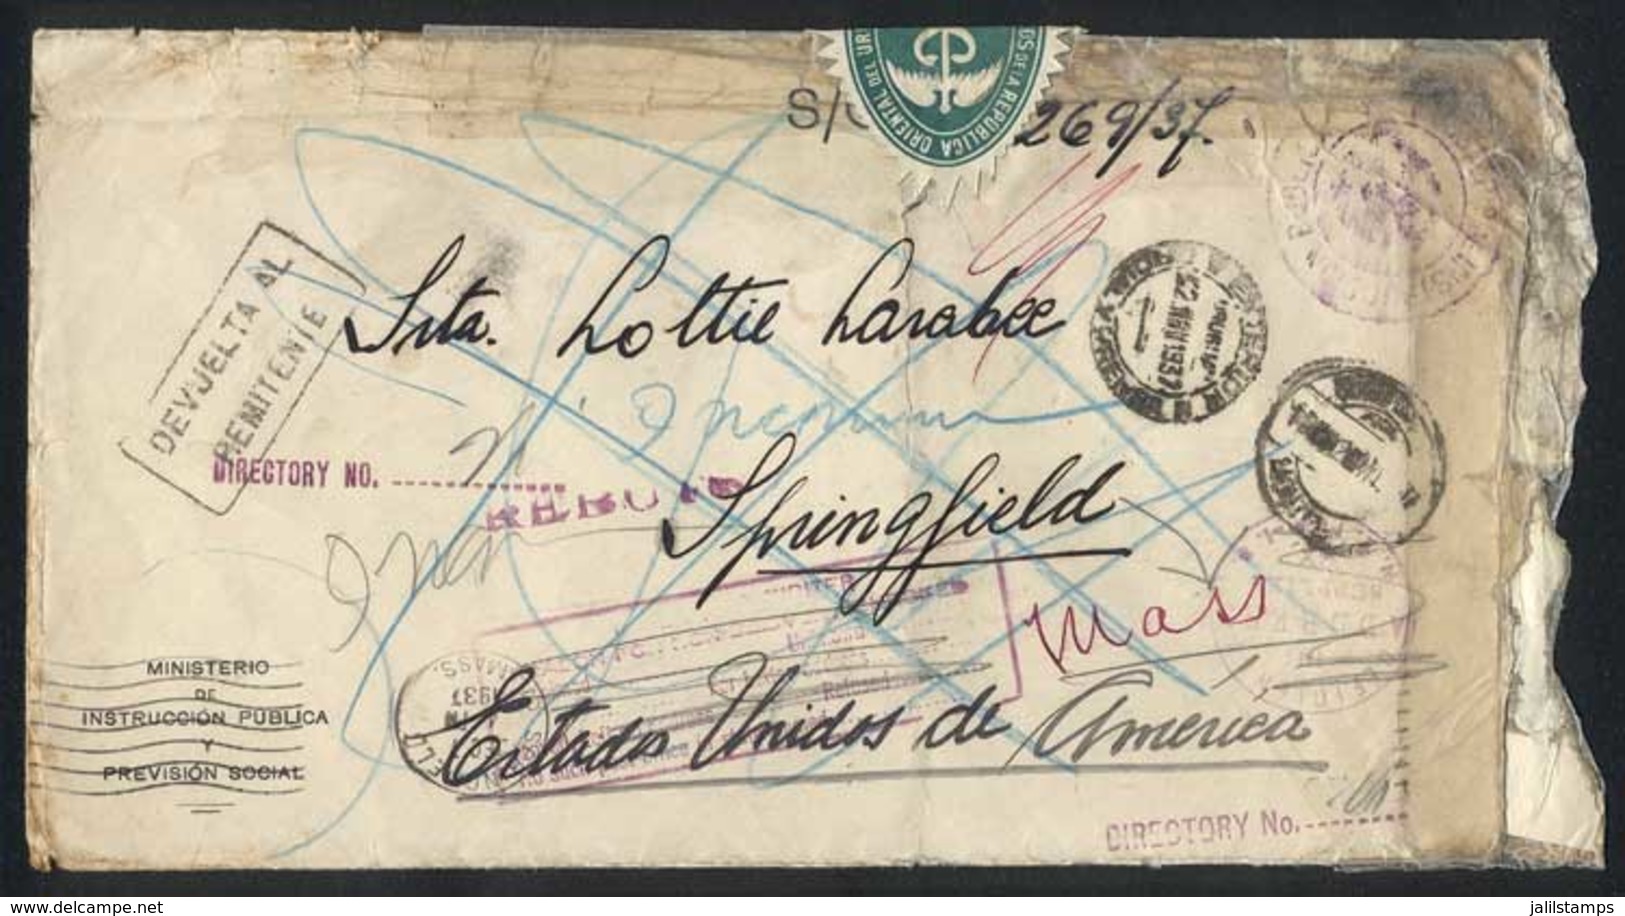 URUGUAY: Official Cover Sent Stampless To USA On 22/NO/1937, Datestamped "Exterior-Oficial Y Prensa", Returned To Sender - Uruguay